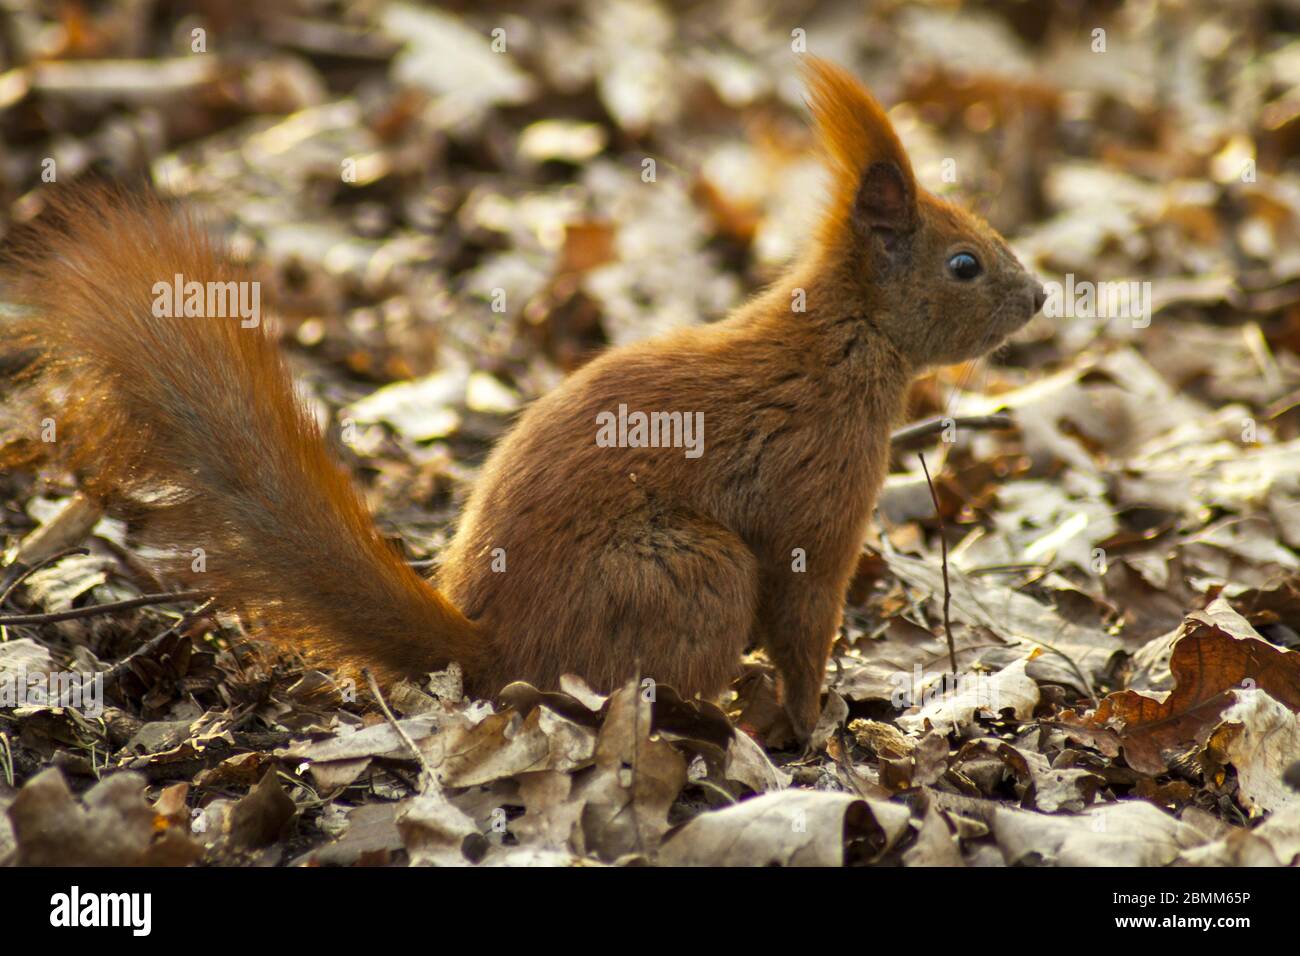 Red squirrel skimming peanuts buried in autumn in a city park. Stock Photo